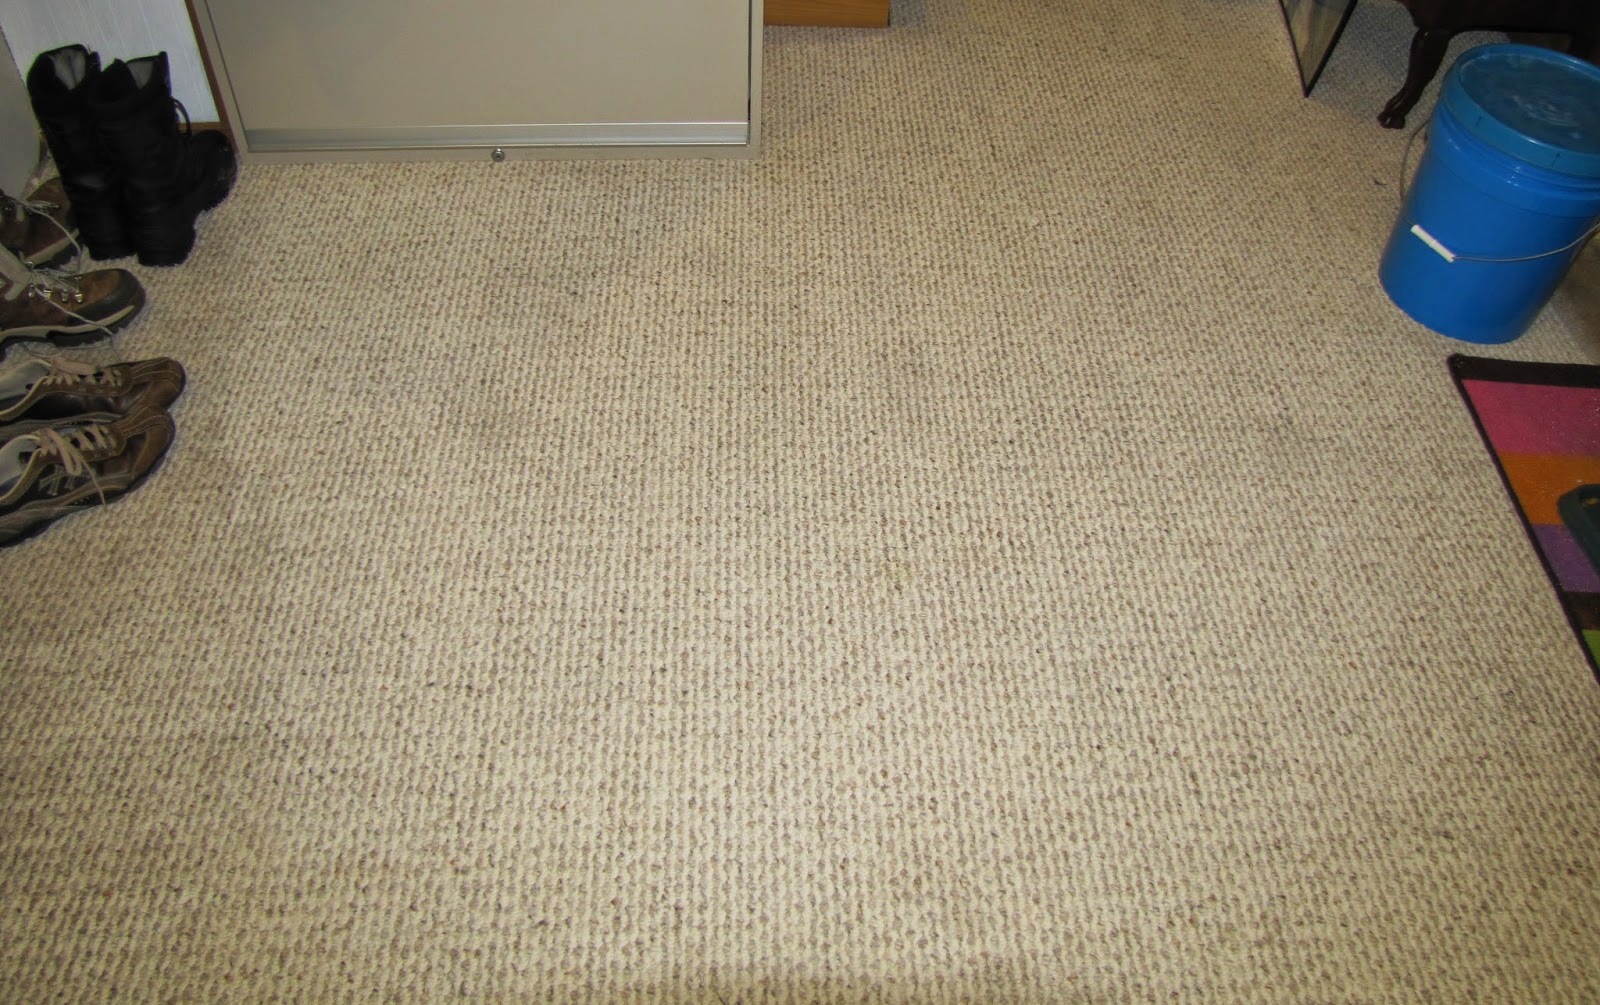 Clean pet stains from carpet